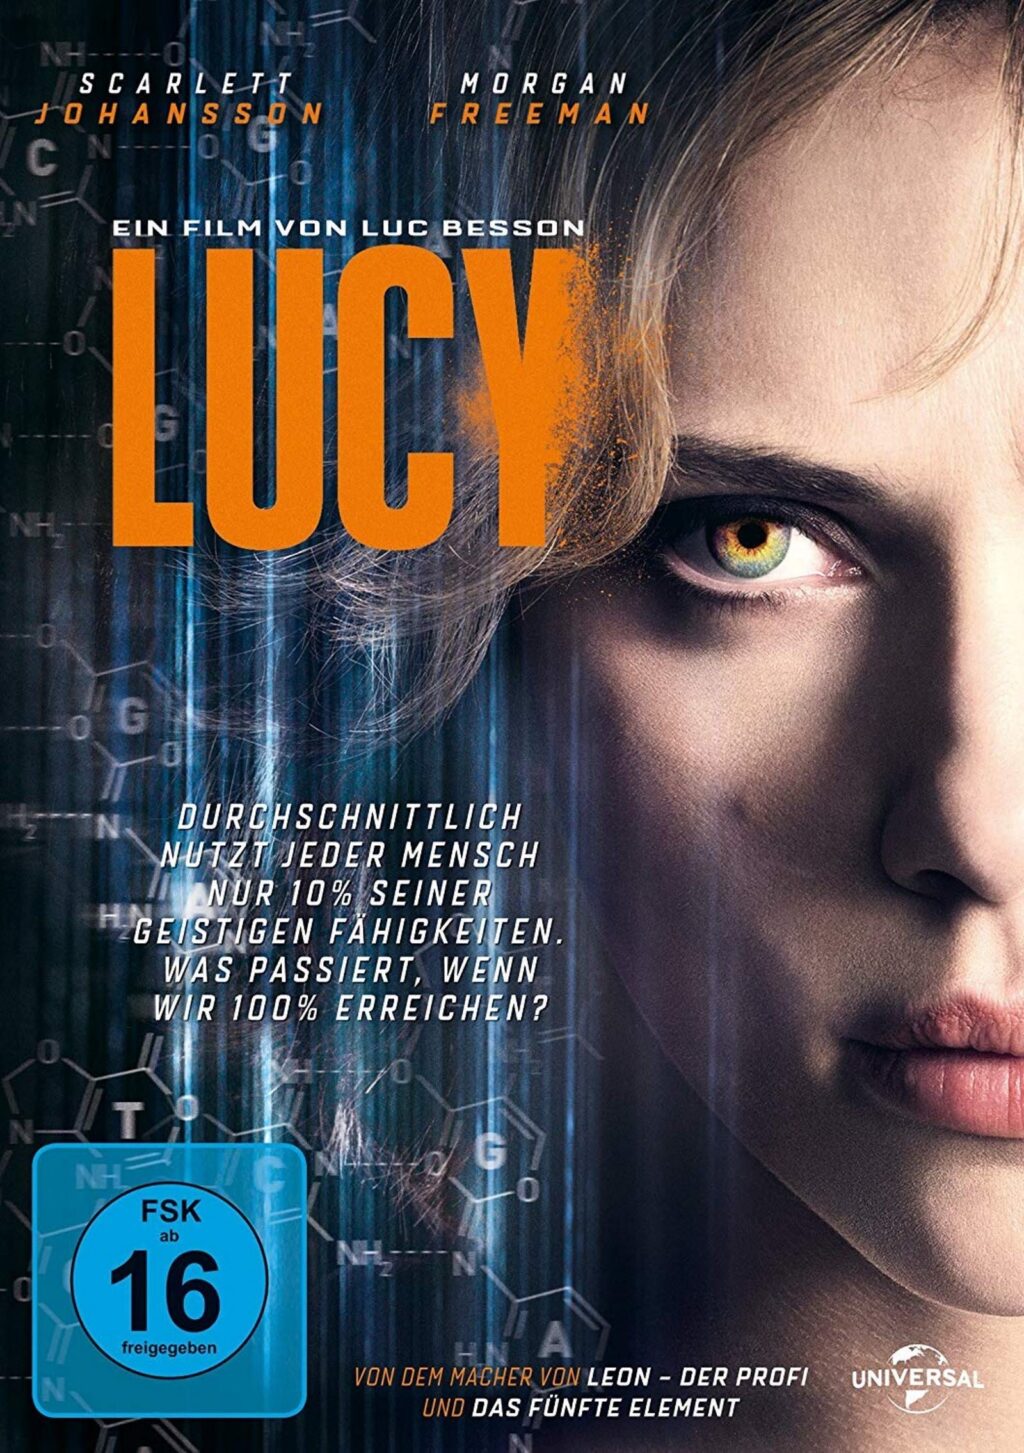 Poster for the movie "Lucy"